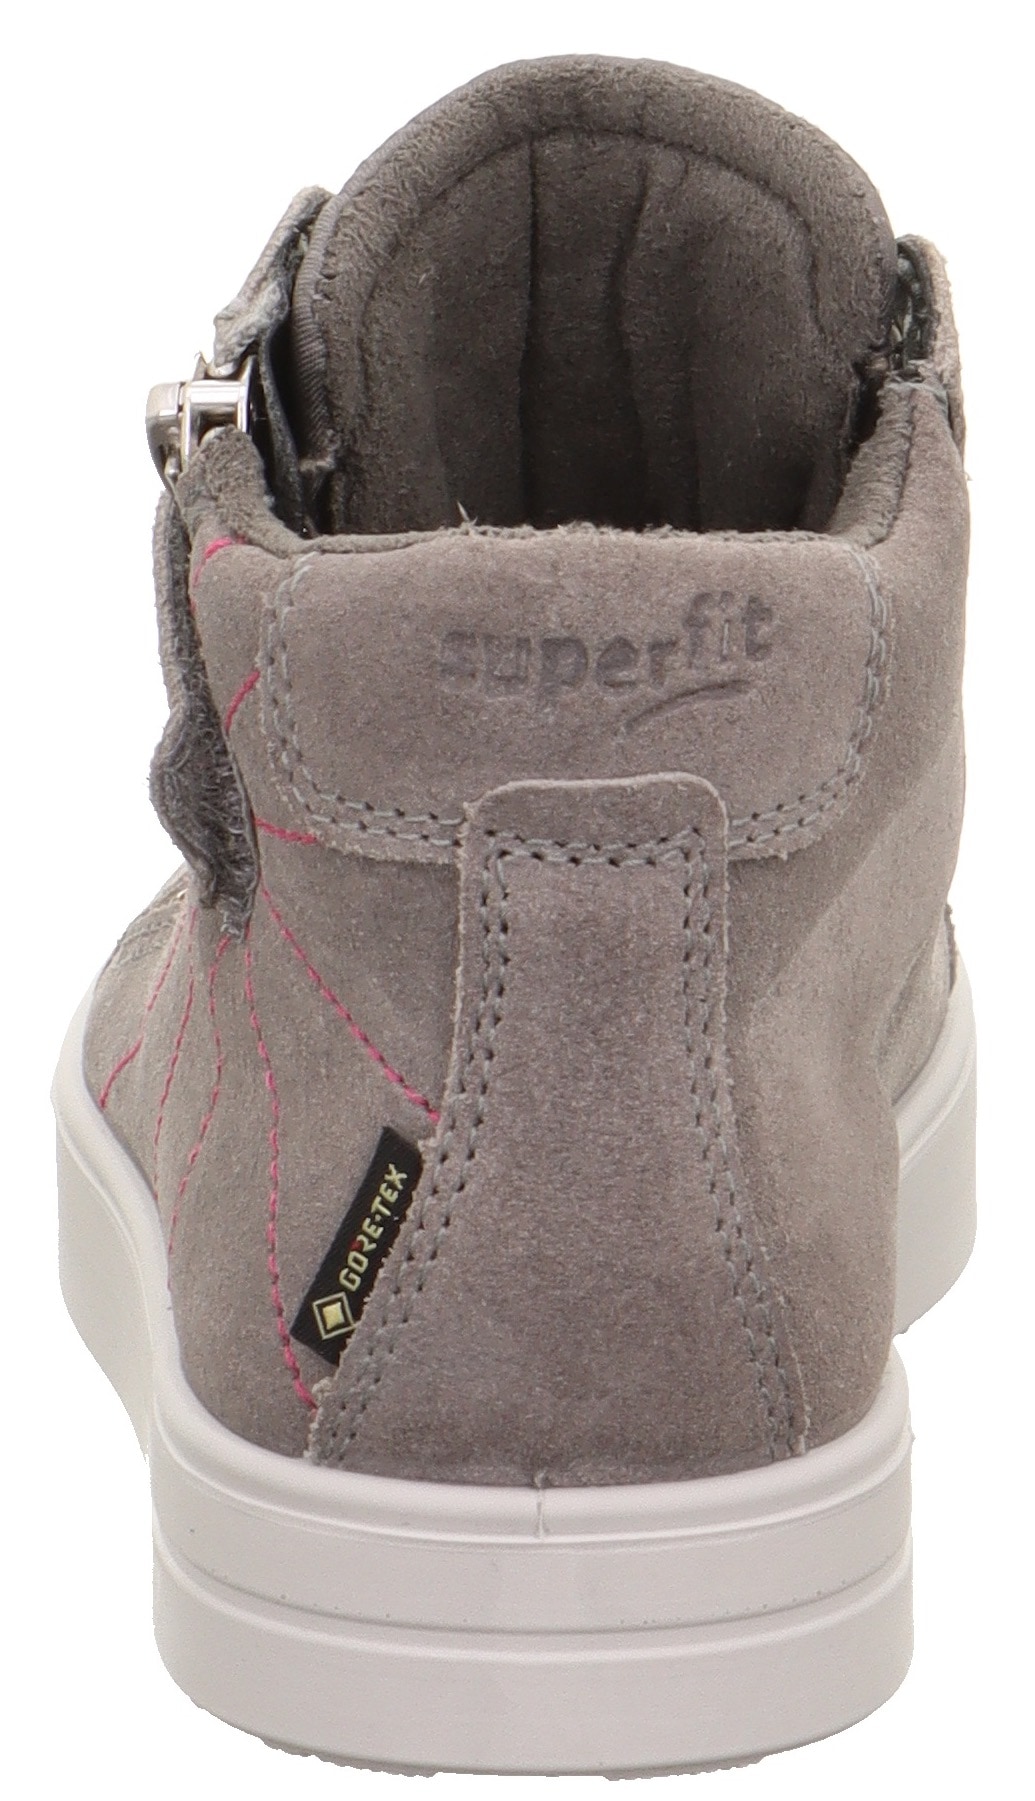 Skechers Girls Shoutouts Quilted Squad PU Ankle Boots